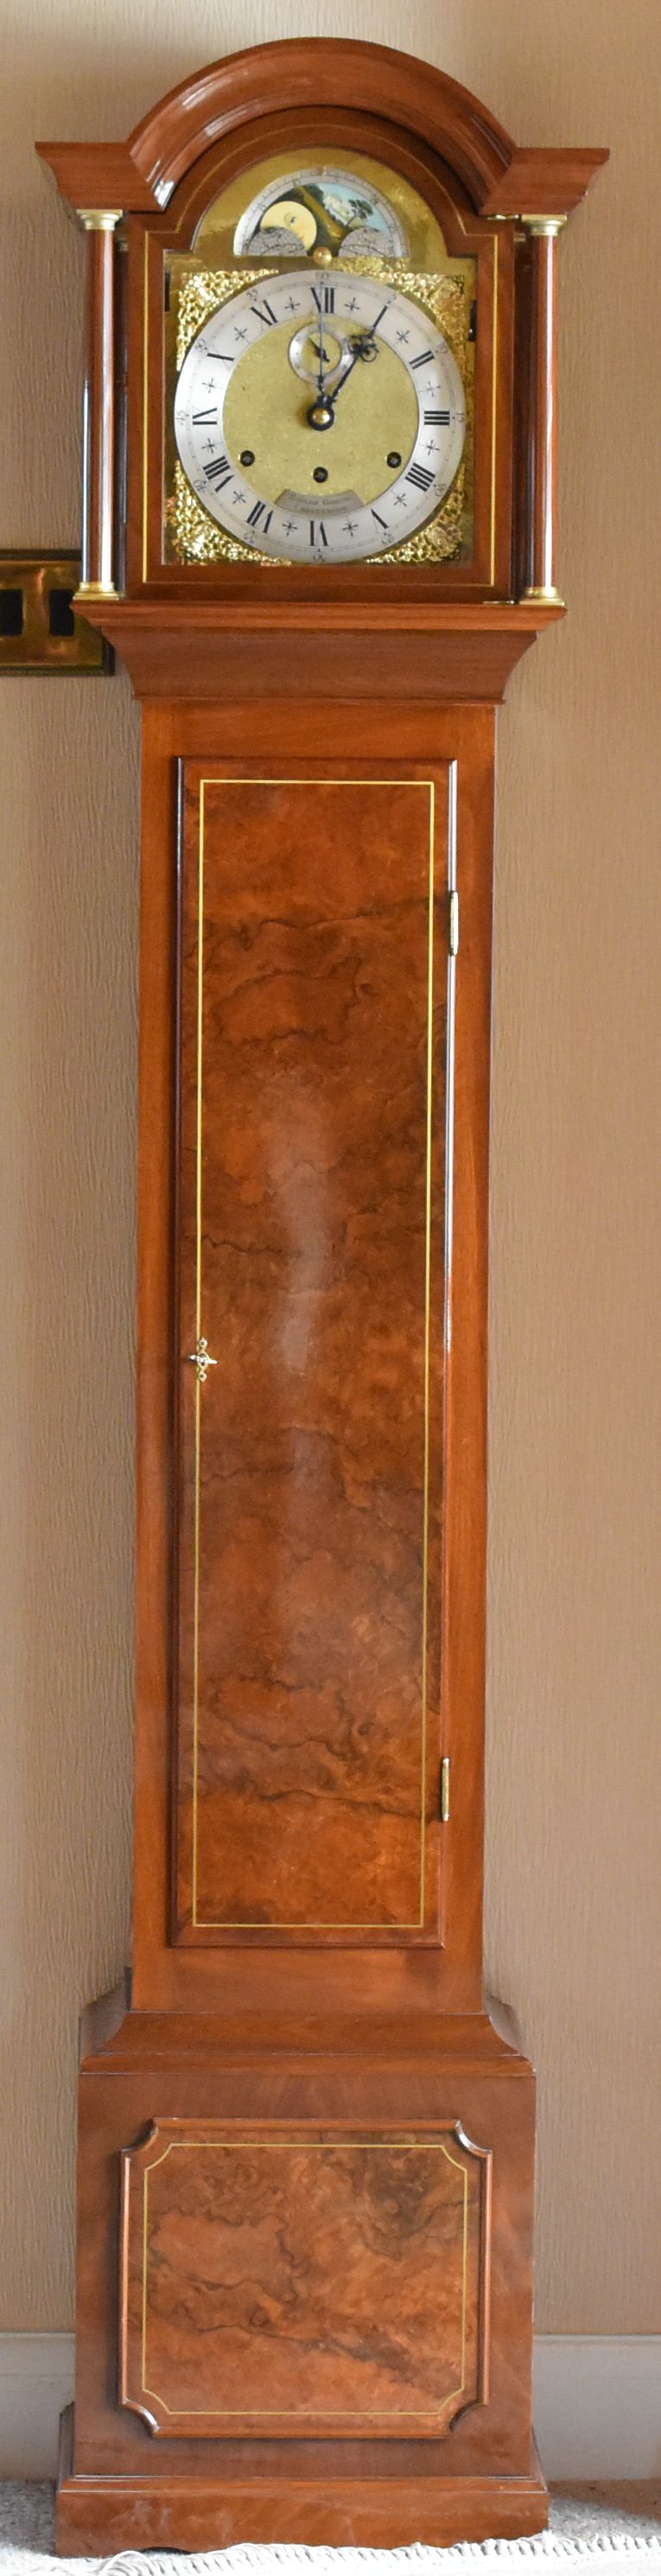 A REPRODUCTION LONGCASE CLOCK BY SINCLAIR HARDING after the style and action of a fine eighteenth